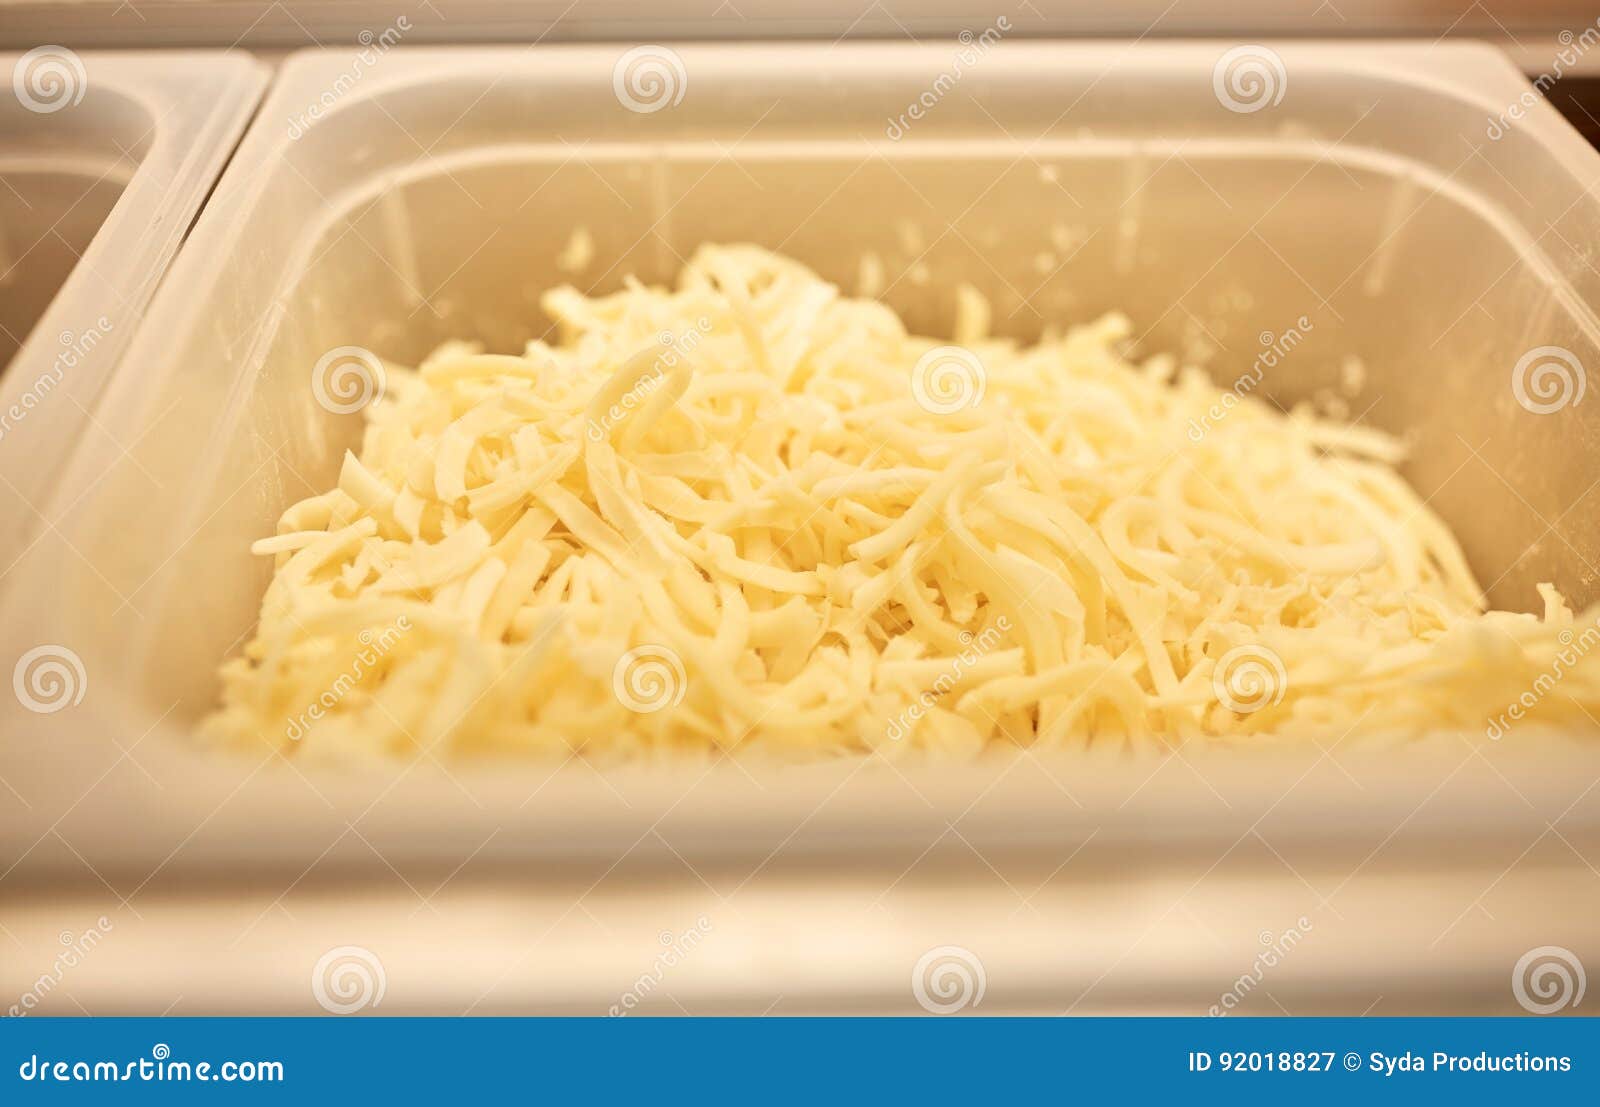 Container with Grated Cheese at Restaurant Kitchen Stock Image - Image of  kitchen, spoon: 92018827